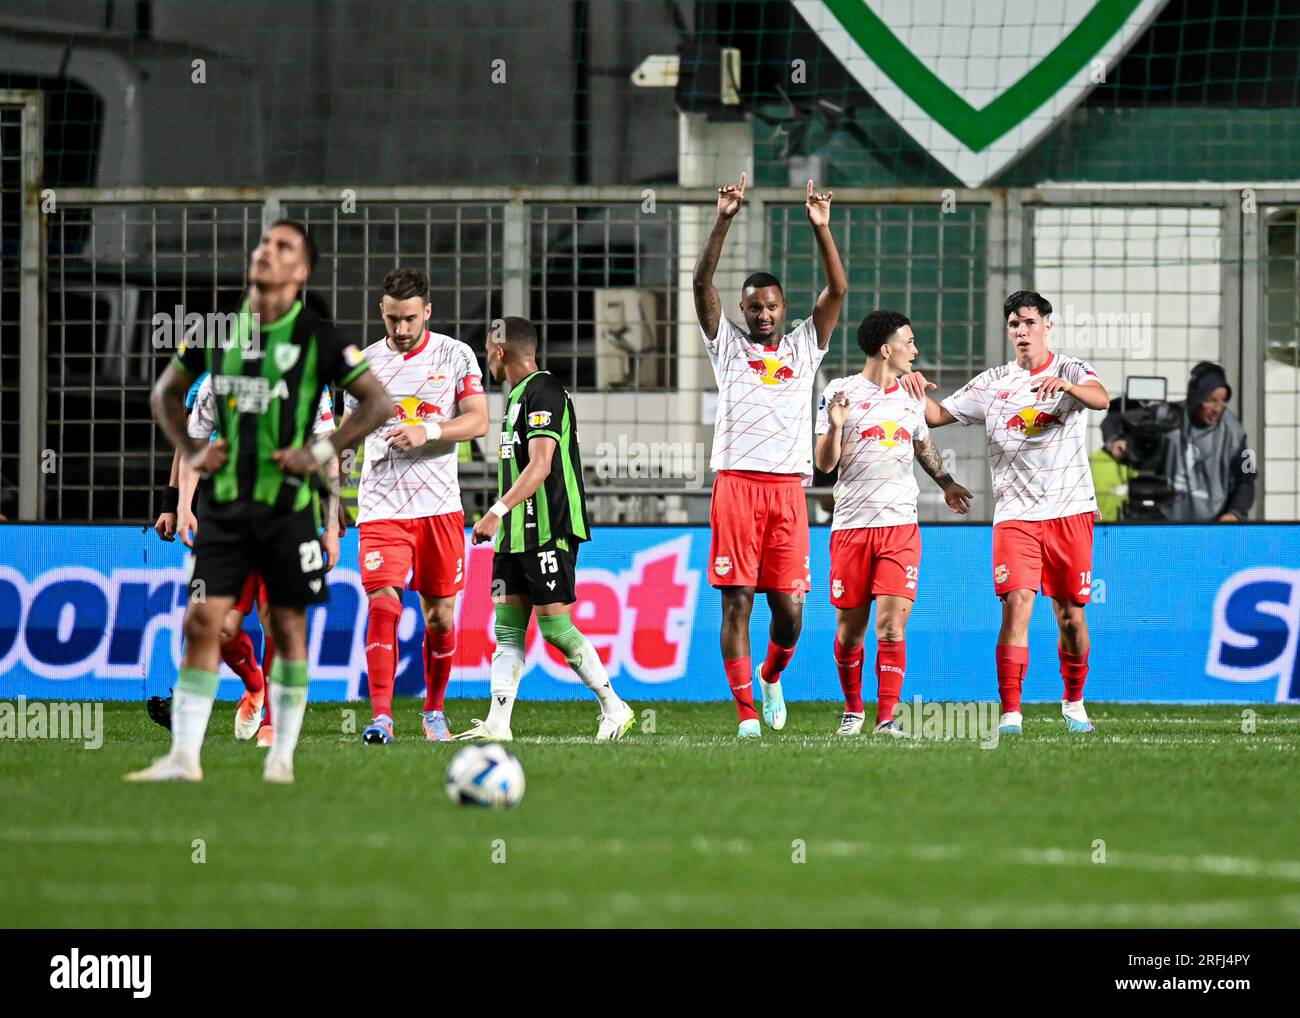 Belo Horizonte, Brazil. 03rd Aug, 2023. Arena Independencia Luan Candido of Red Bull Bragantino celebrates the goal against America Mineiro, during the match between America Mineiro and Red Bull Bragantino, for the first match of the round of 16 of the Copa Sudamericana 2023, at Arena Independencia, this Thursday 03 30761 (Gledston Tavares/SPP) Credit: SPP Sport Press Photo. /Alamy Live News Stock Photo